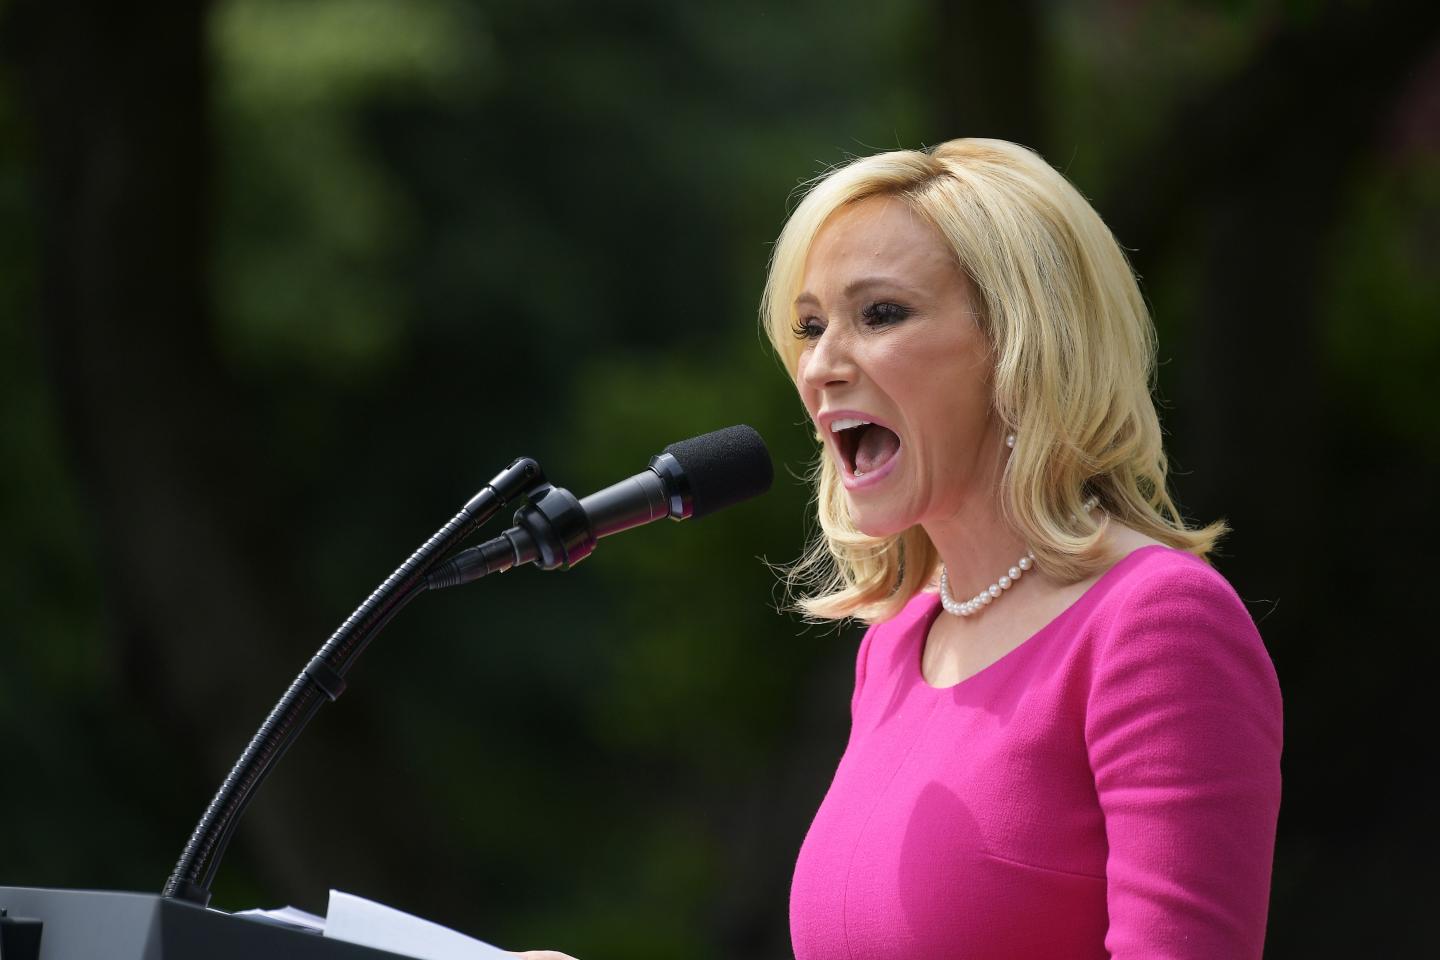 How Did We Miss This? Spiritual Adviser To Trump, Paula White Suggests People Send Her Their Salary For A Month Or Face Consequences